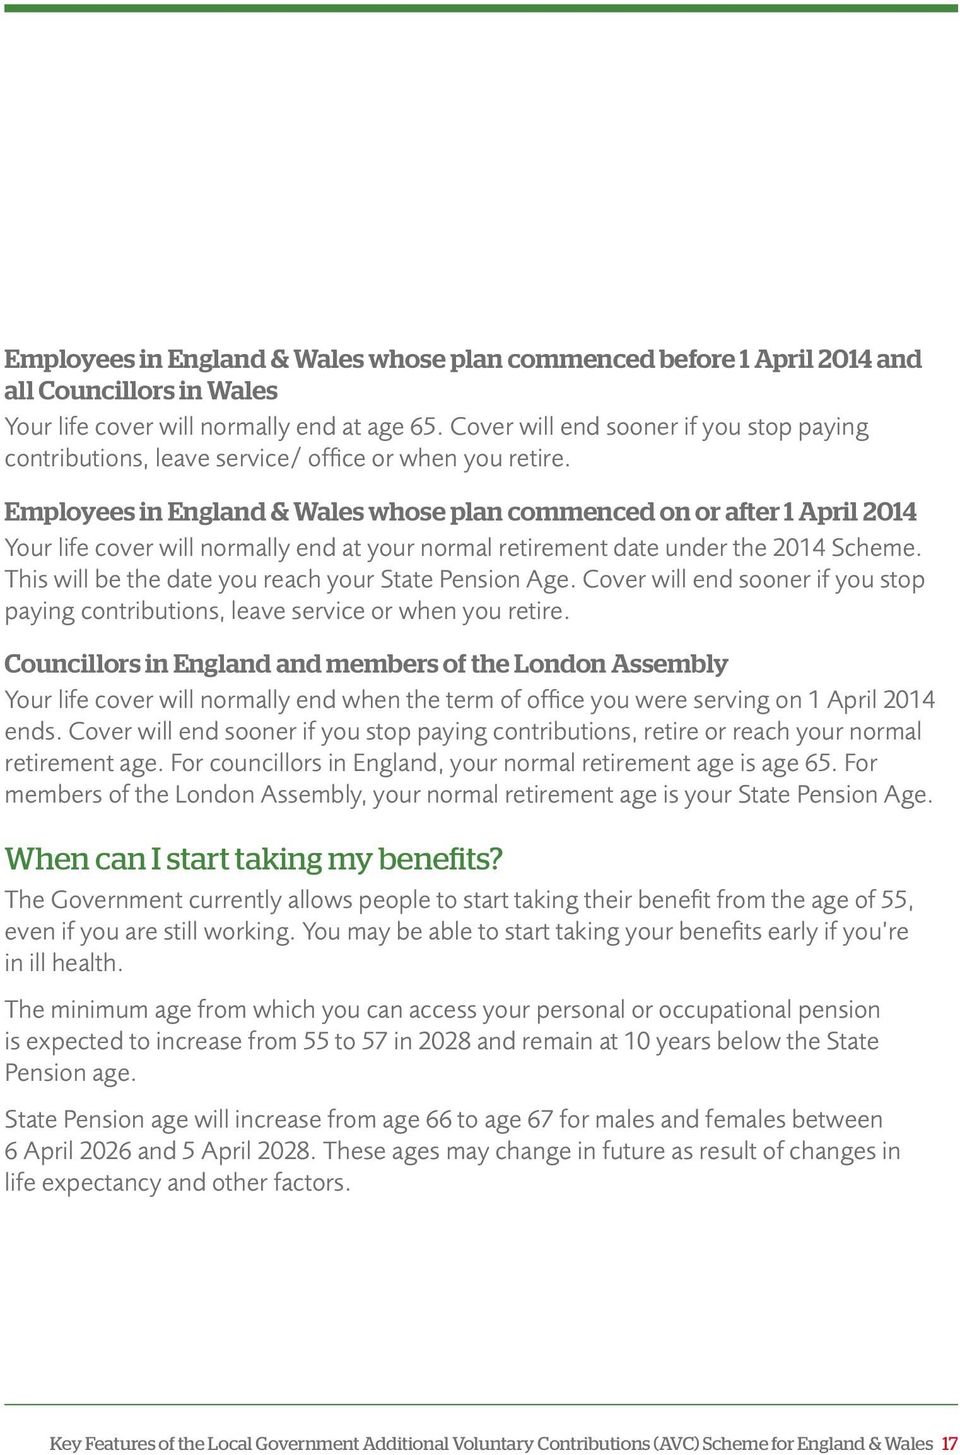 Employees in England & Wales whose plan commenced on or after 1 April 2014 Your life cover will normally end at your normal retirement date under the 2014 Scheme.